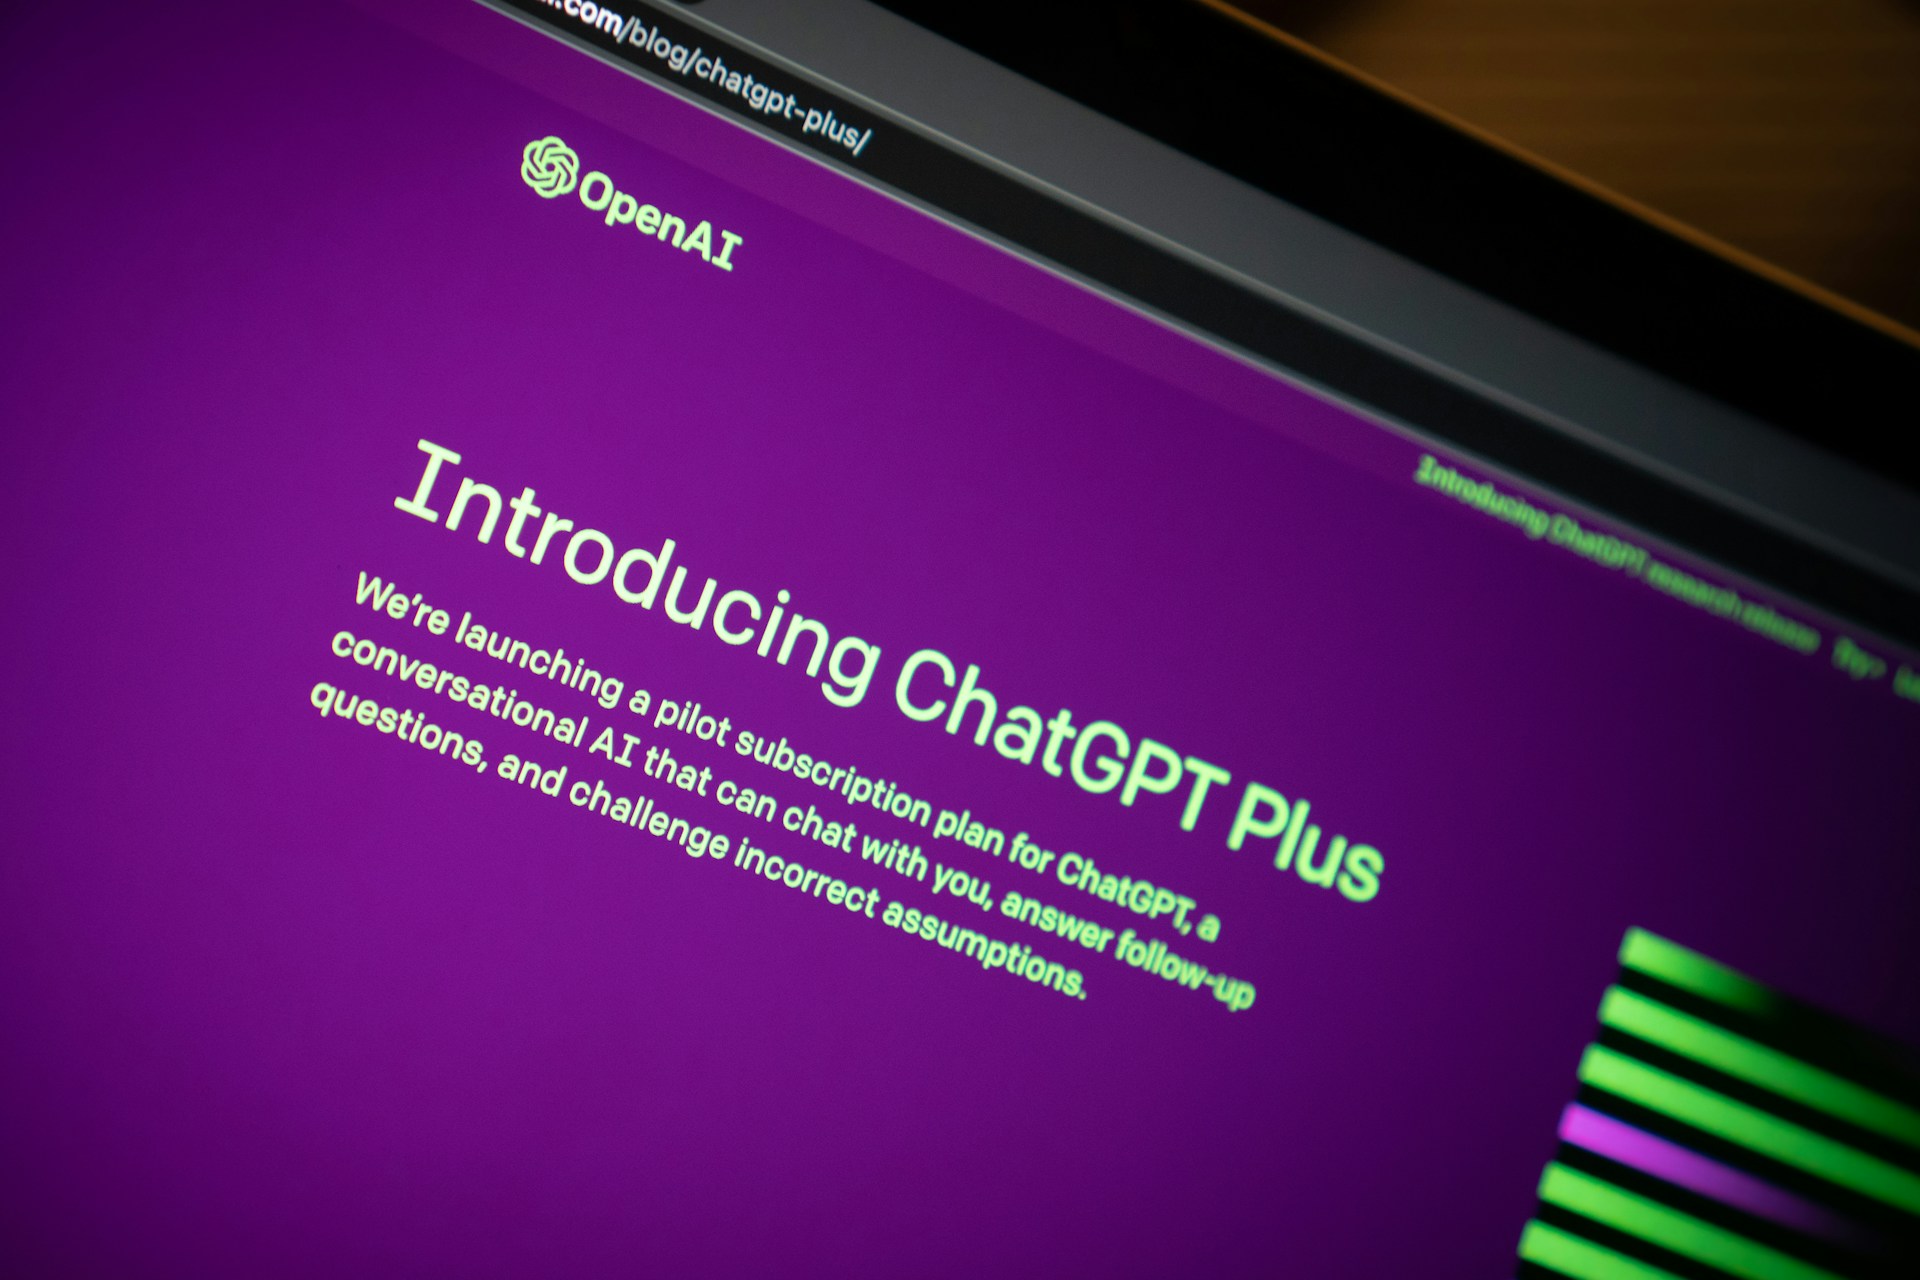 ChatGPT Plus subscribers get access to Memory, but users in Europe and Korea miss out